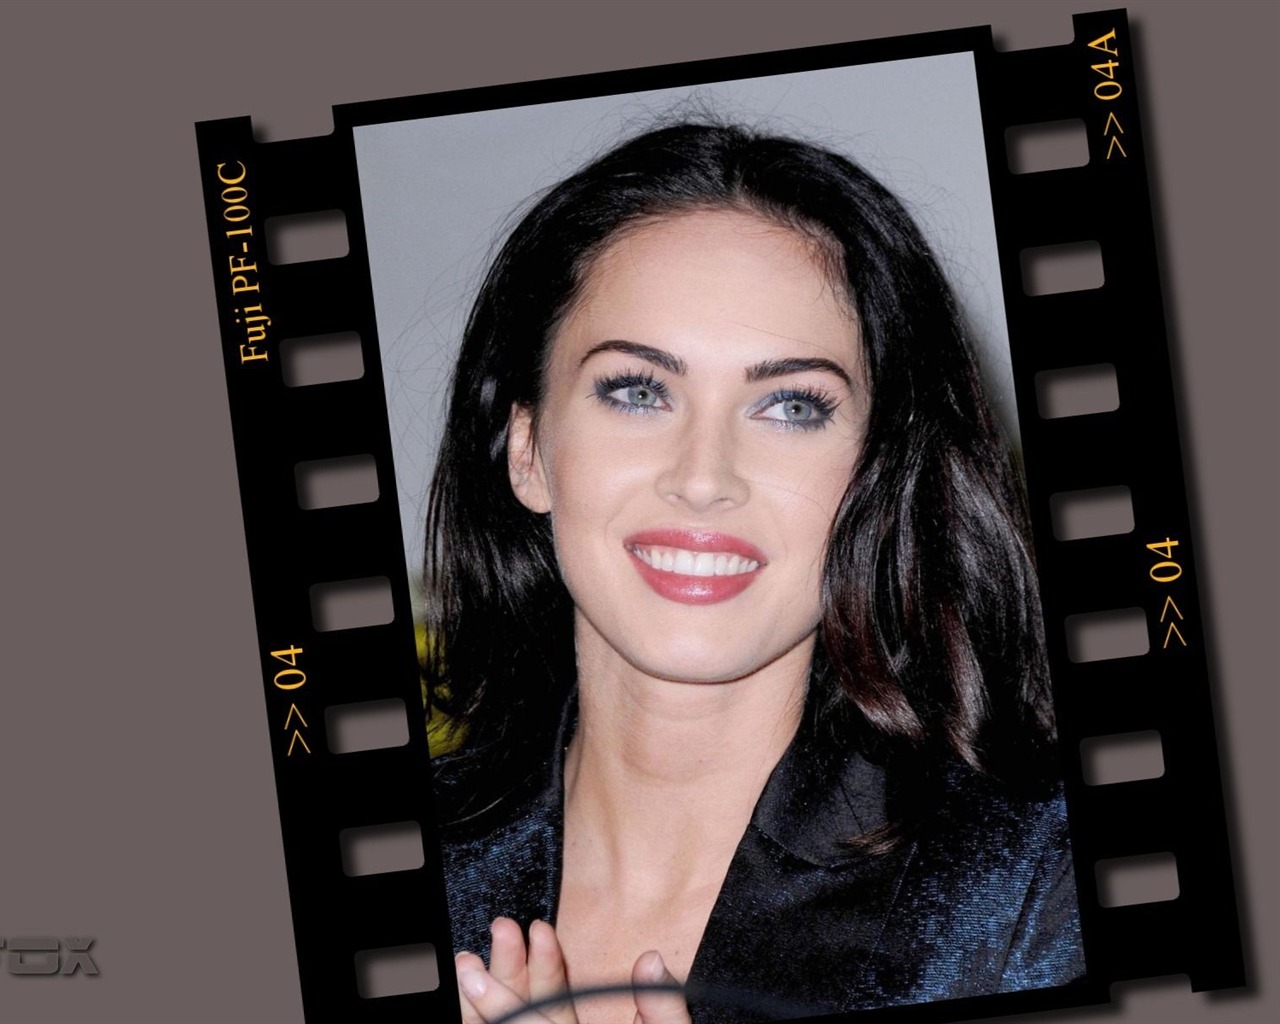 Megan Fox #052 - 1280x1024 Wallpapers Pictures Photos Images